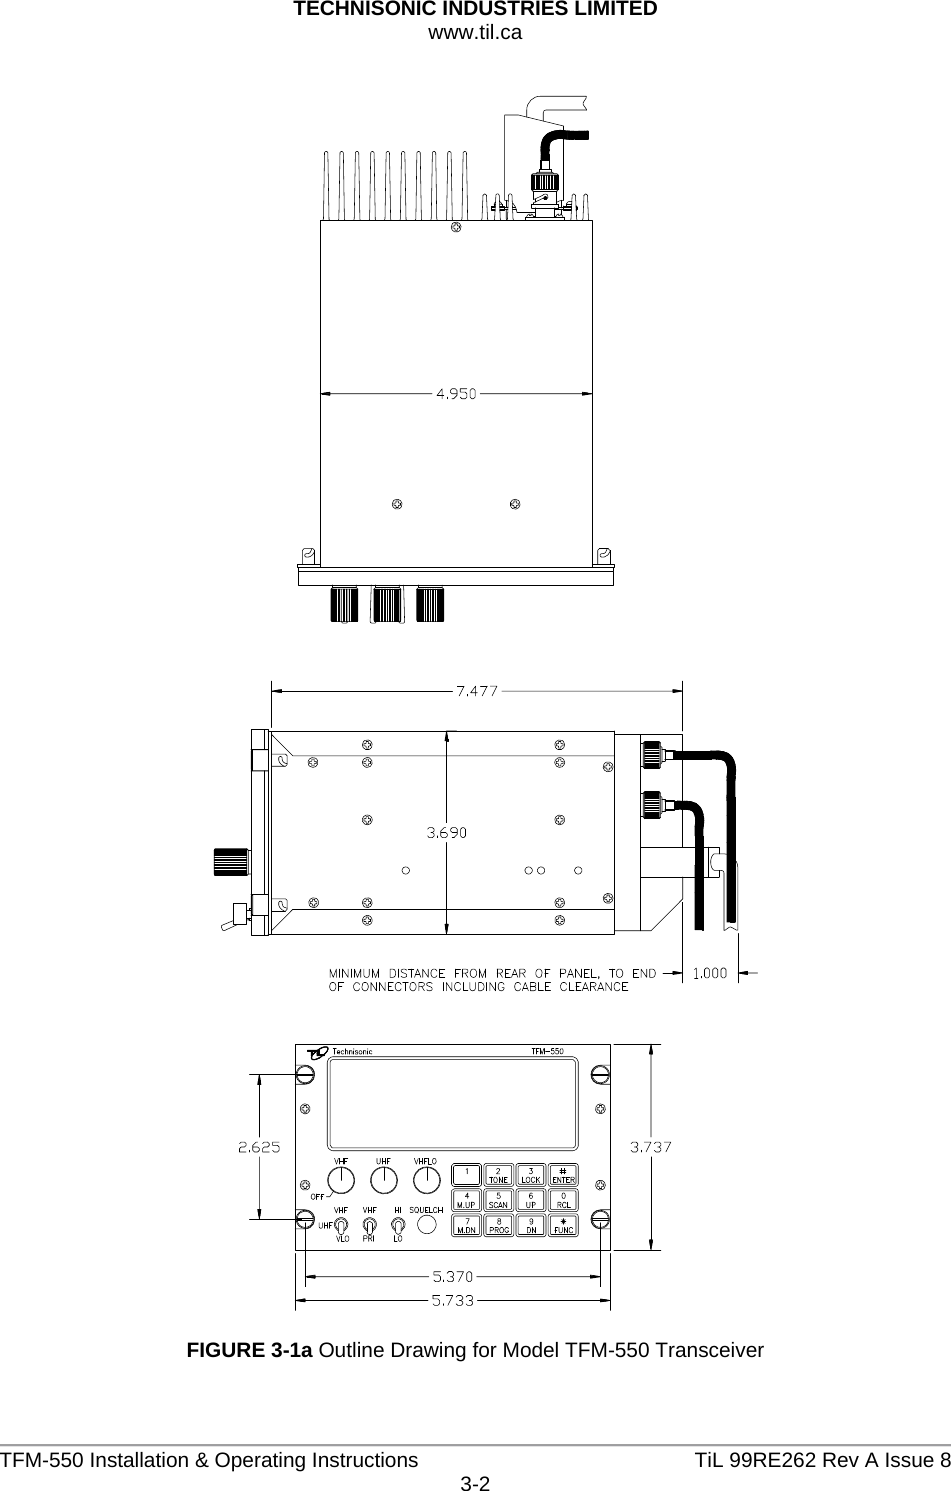 TECHNISONIC INDUSTRIES LIMITED www.til.ca   TFM-550 Installation &amp; Operating Instructions  TiL 99RE262 Rev A Issue 83-2    FIGURE 3-1a Outline Drawing for Model TFM-550 Transceiver  